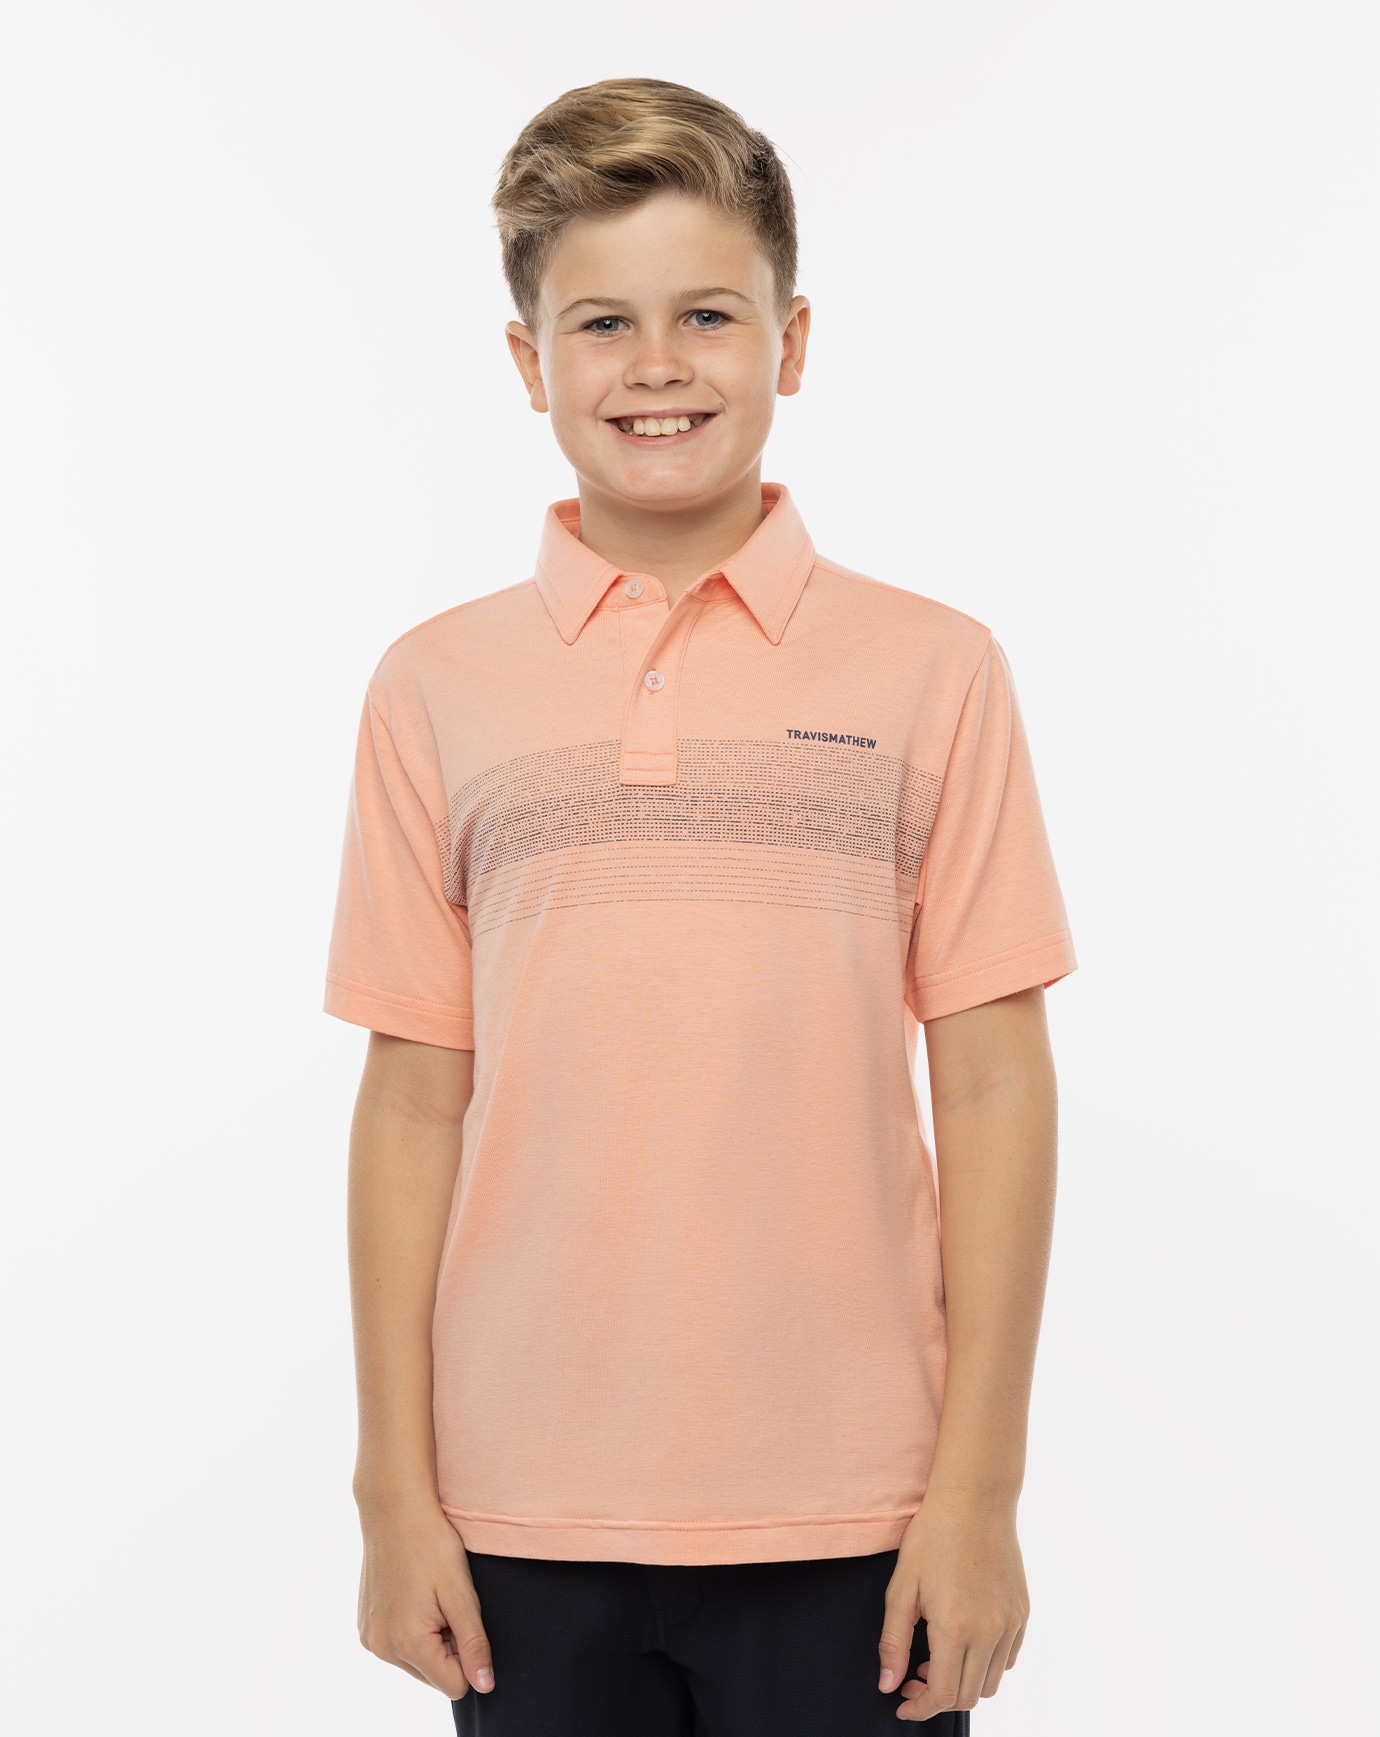 Related Product - MESA CENTRAL YOUTH POLO